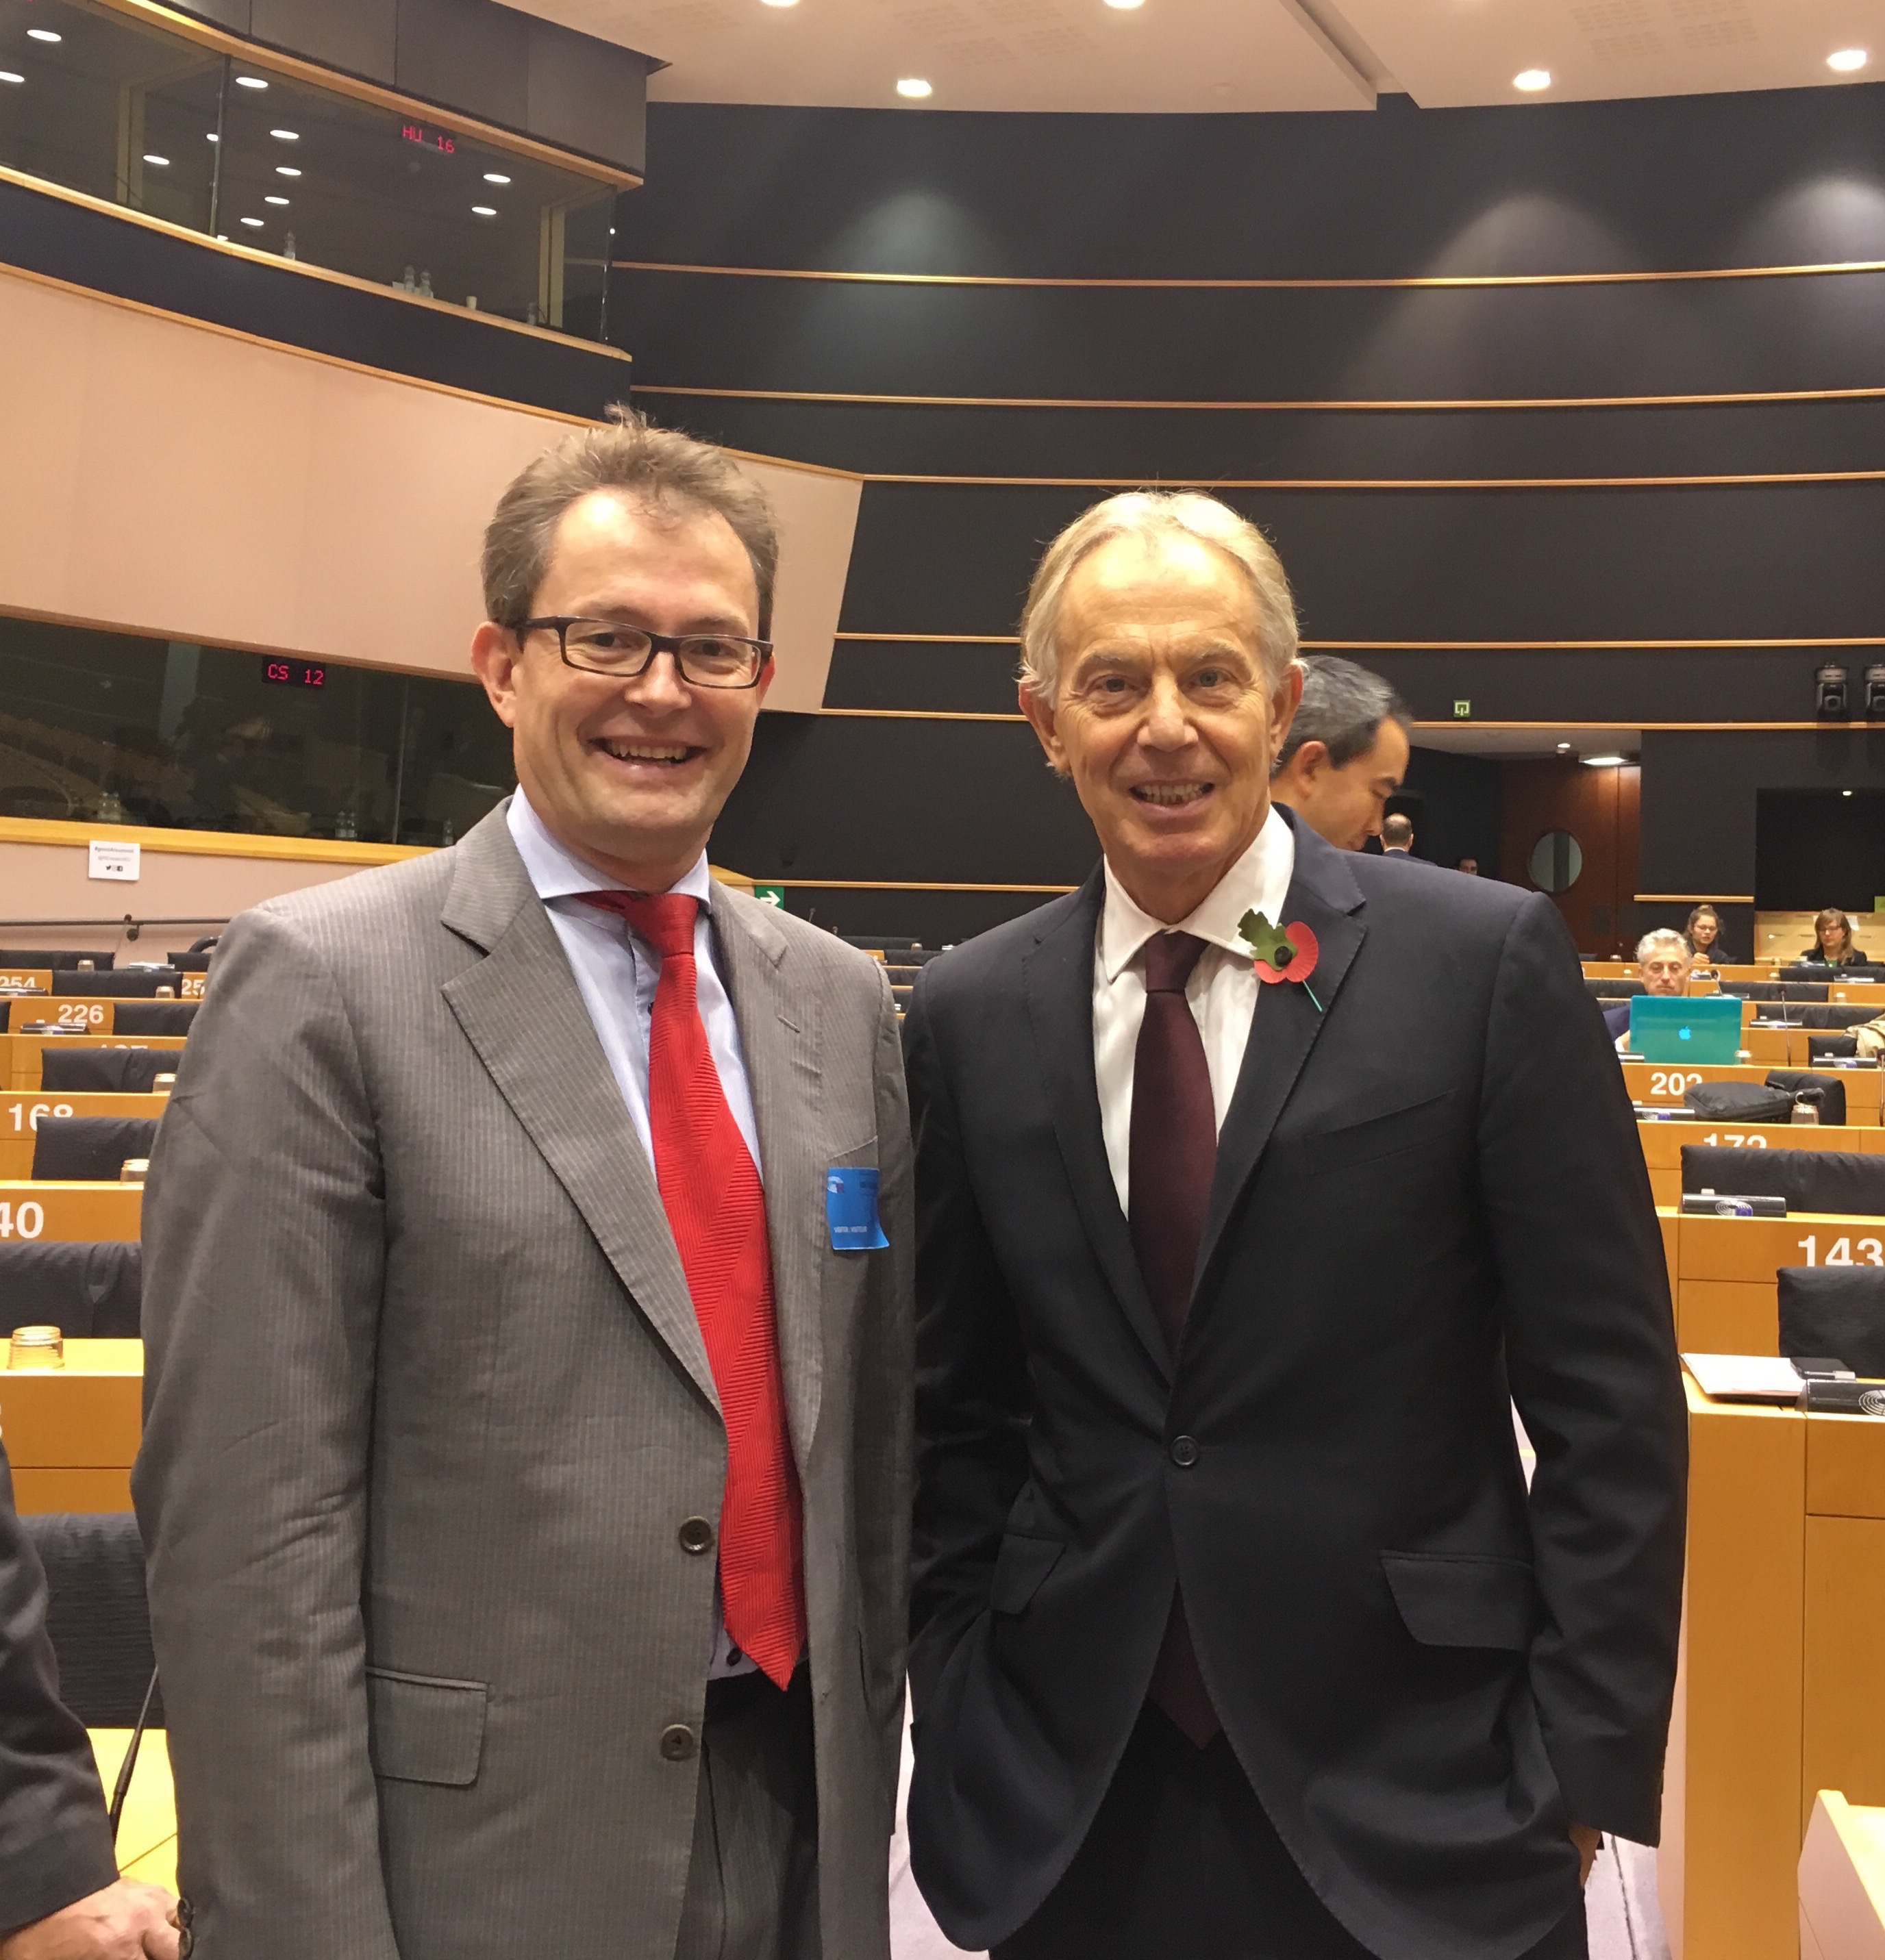 Presentation of the AI4People Principles, European Parliament, Brussels 2018 (with Tony Blair)